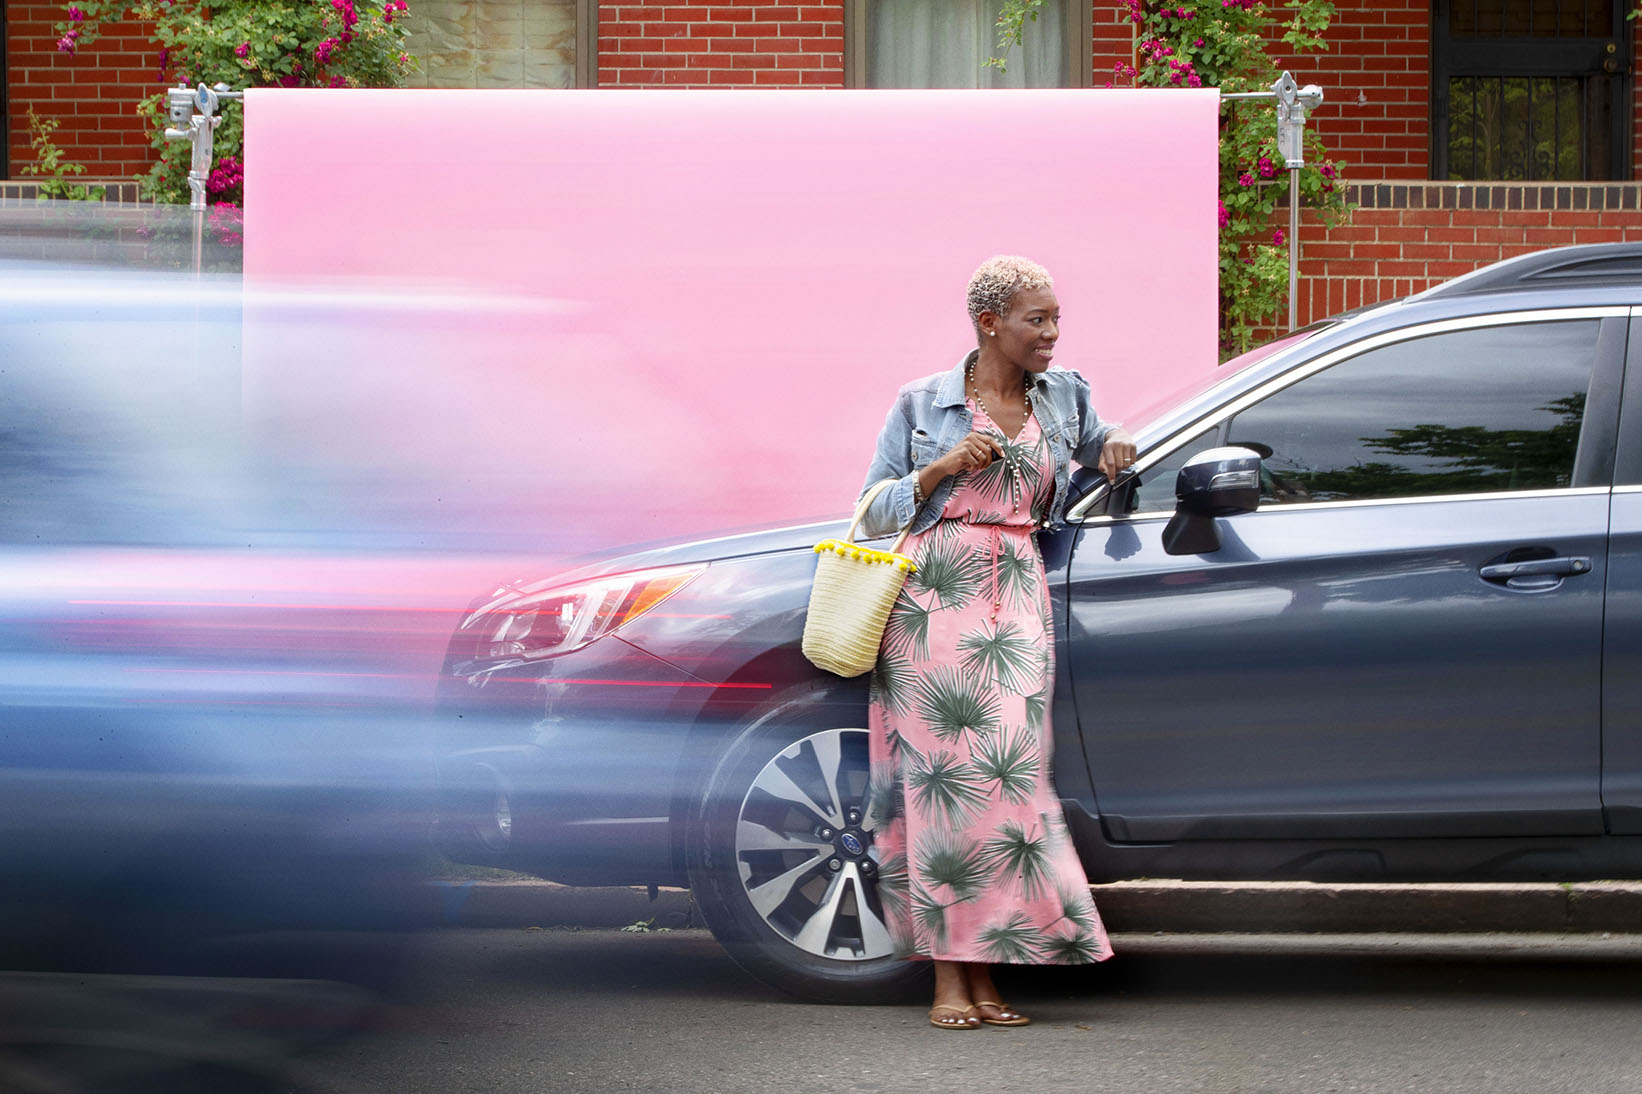 Image of a woman leaning on a car